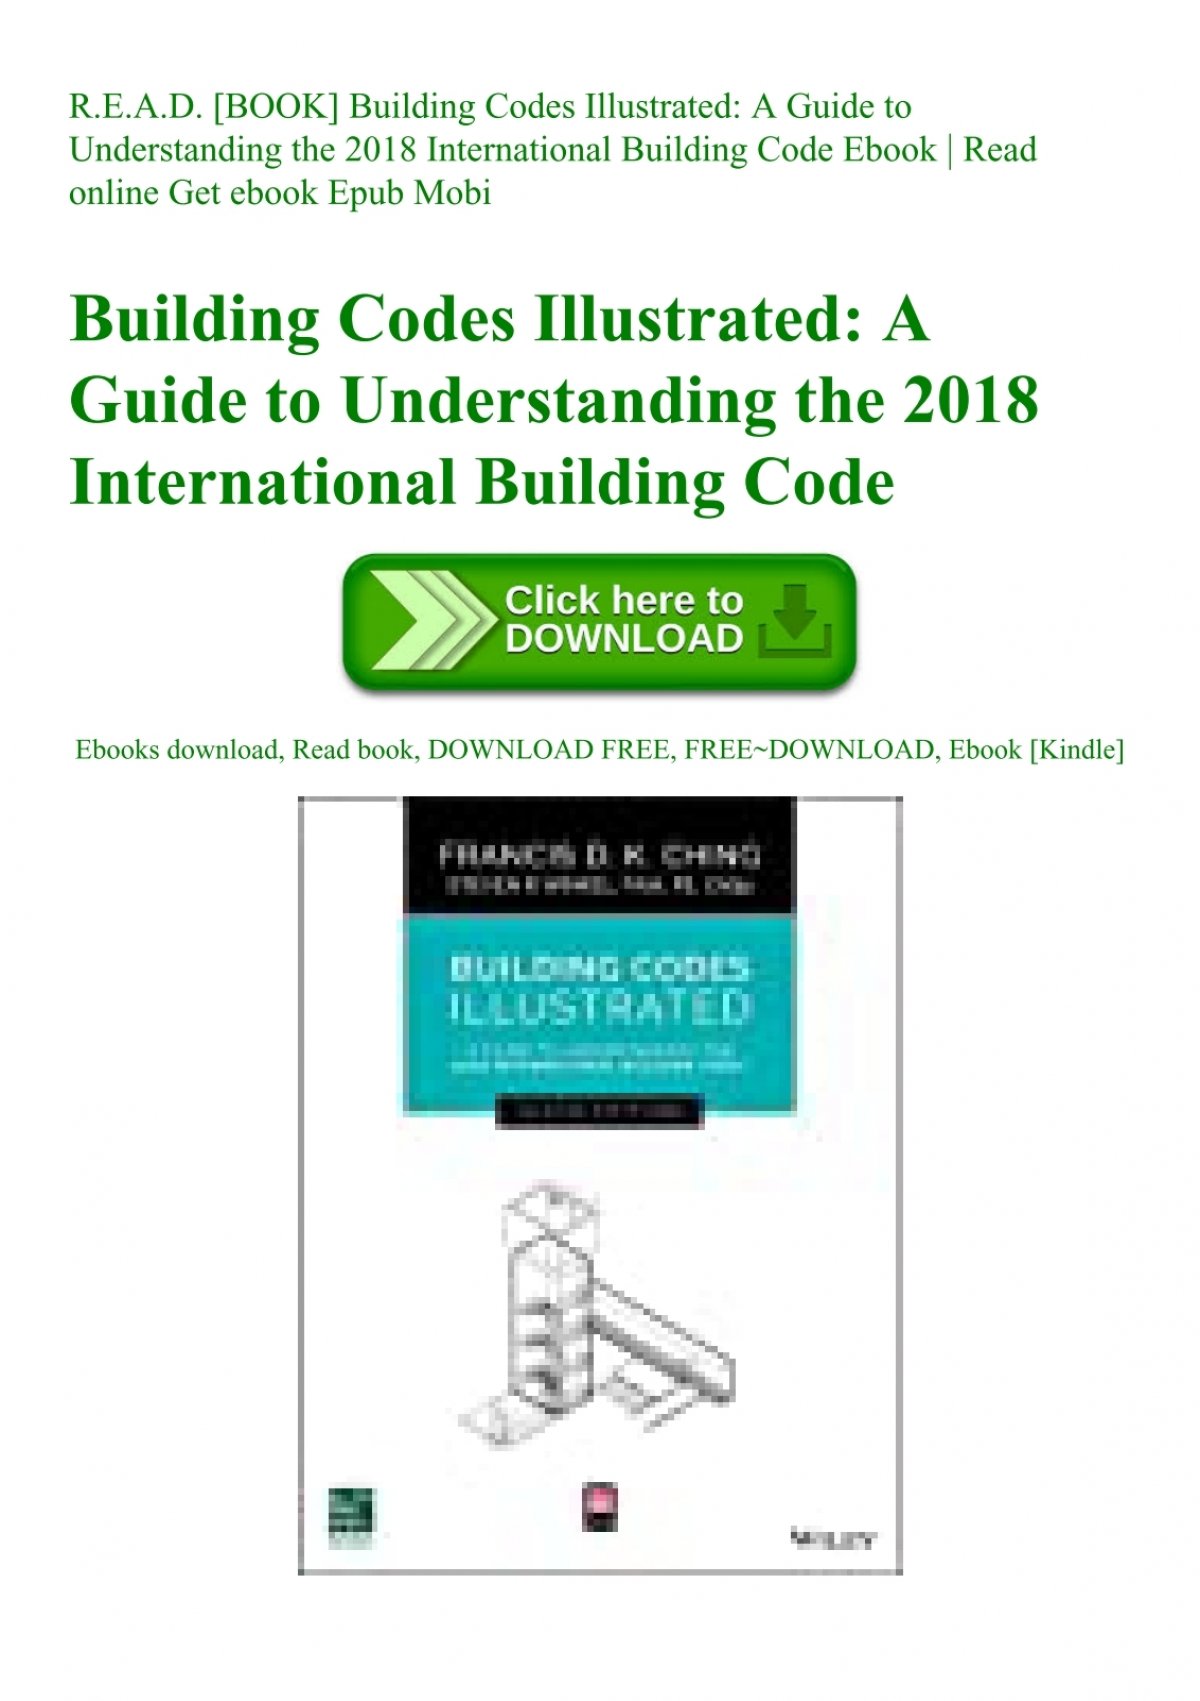 building codes illustrated 2018 pdf free download